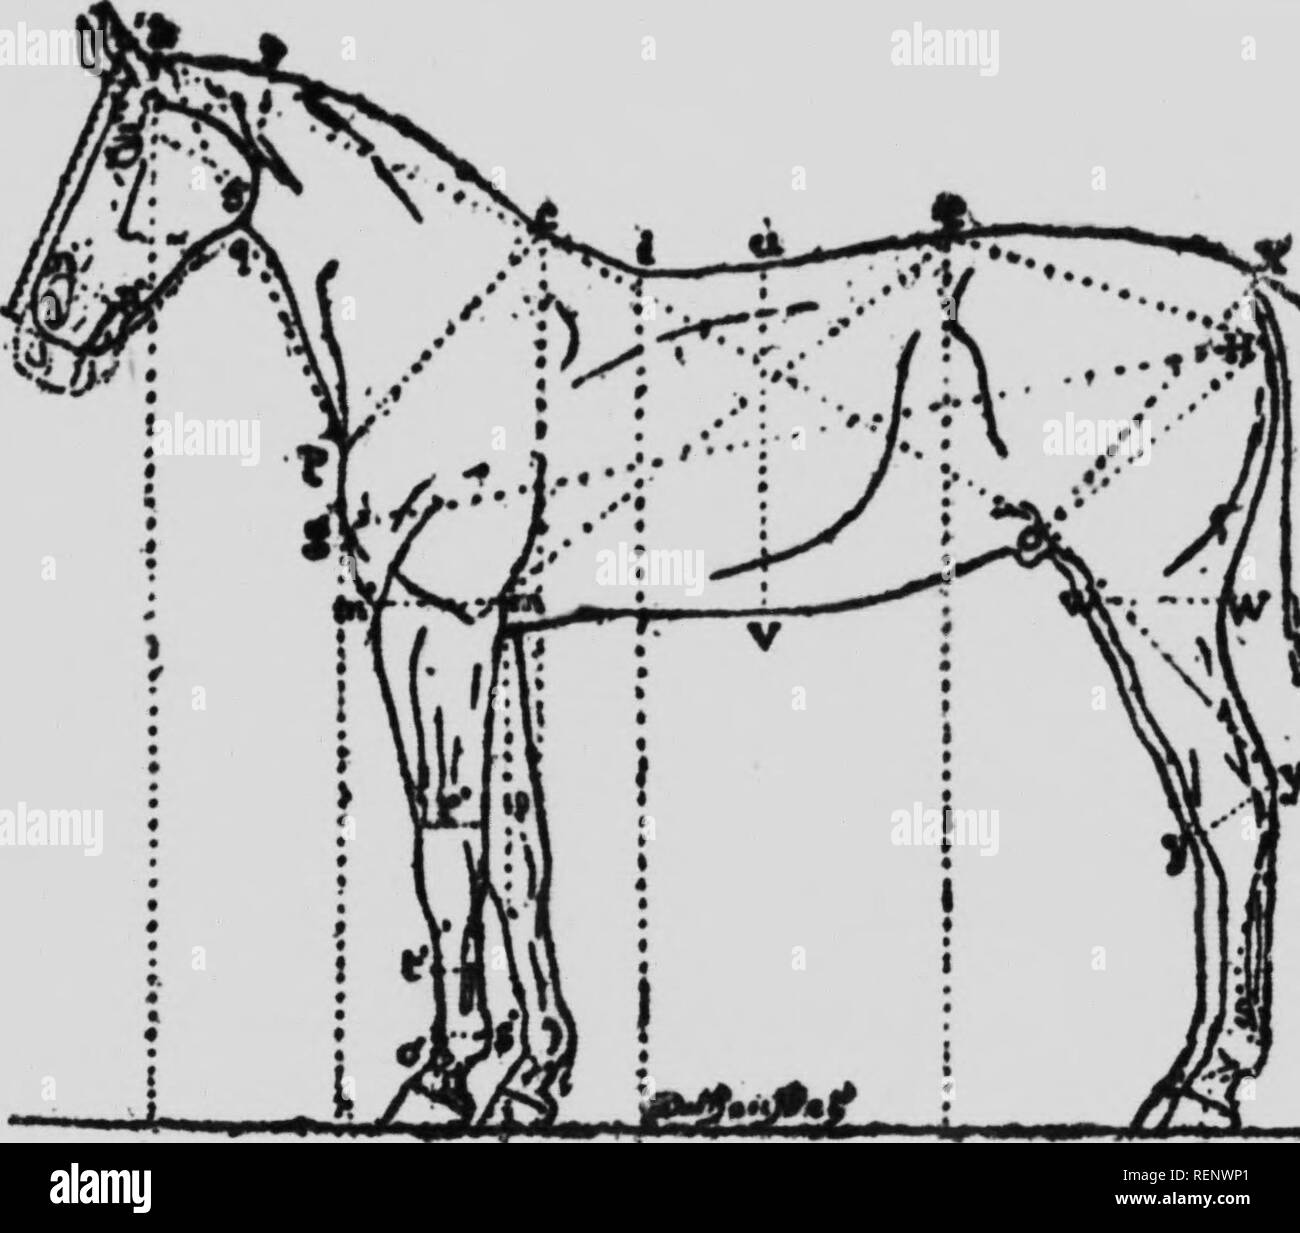 Horse Breeding In Canada Microform Horses Chevaux A 60 A Of The Baok And The Middle Of The Abdomen 1 H And 4 Parts U V 17 Width Of The Body 1